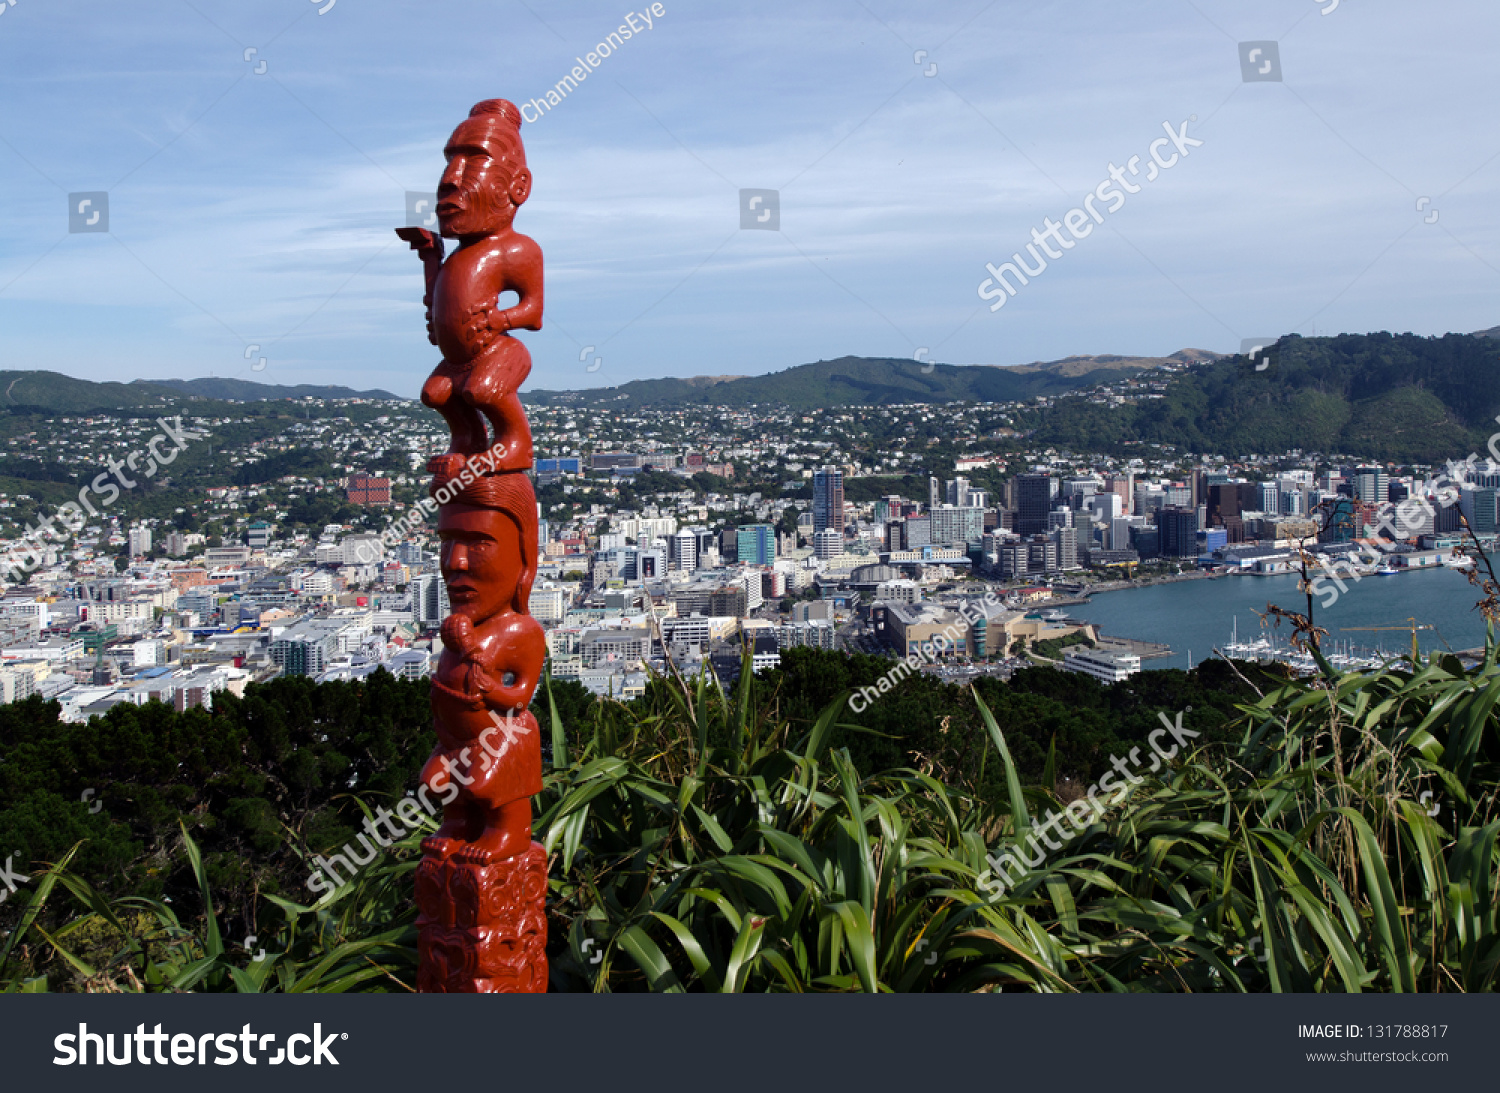 An ancient Maori sculpture of man and a woman mad out of wood on top of Mt Victoria in Wellington, New Zealand. #131788817